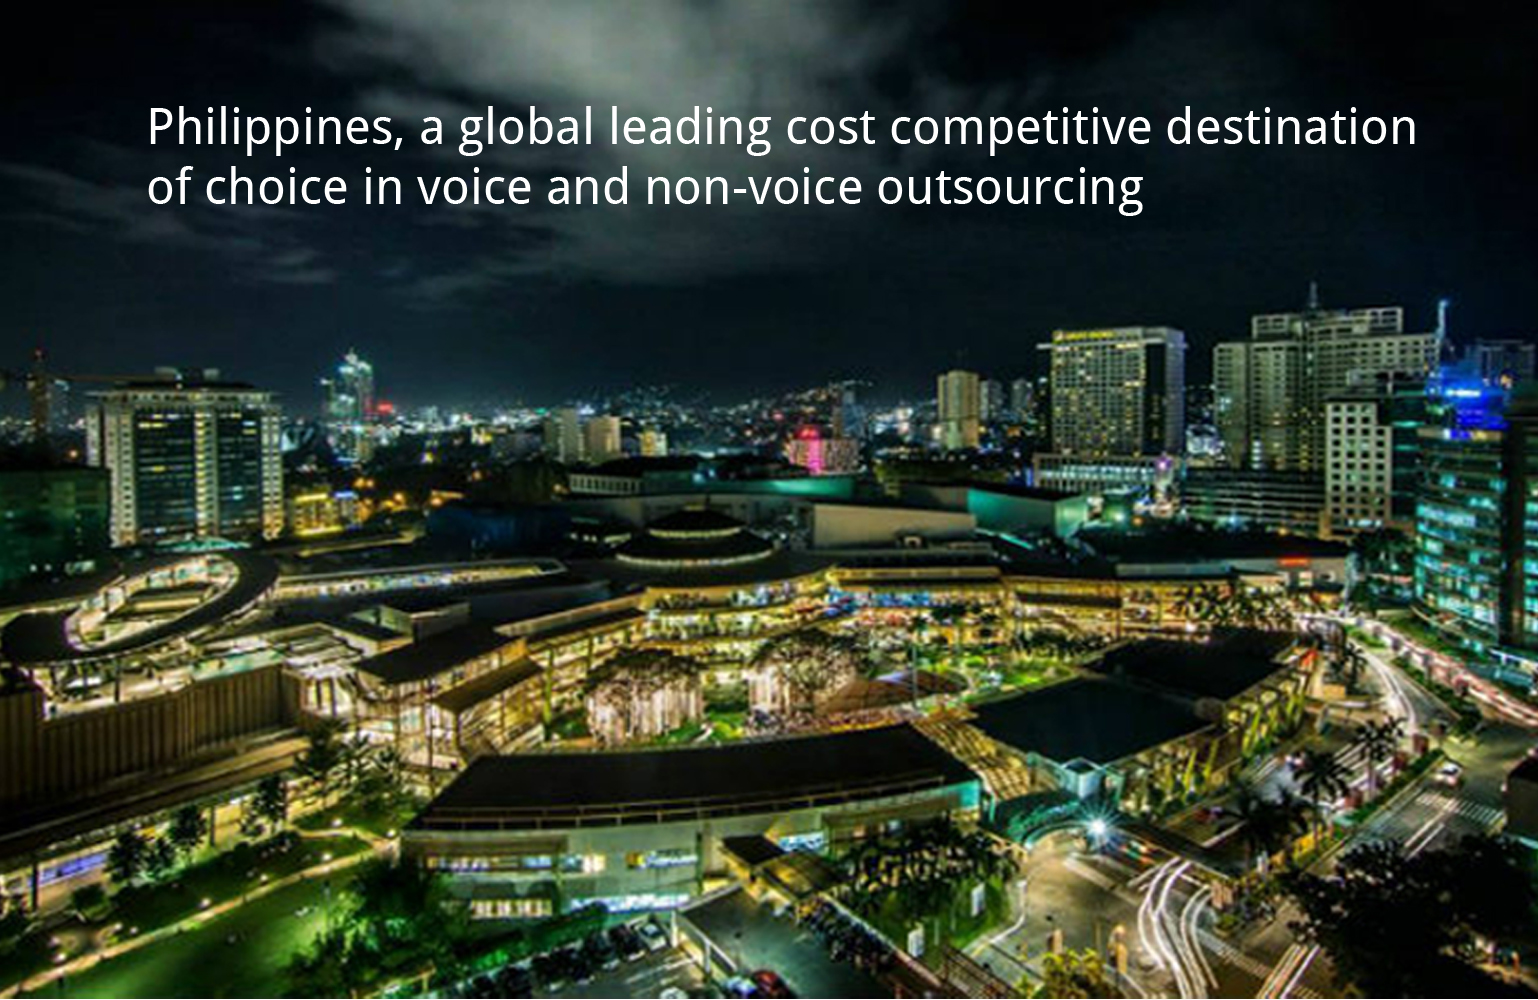 Consider outsourcing? Here are some top reasons why the Philippines is an ideal outsourcing destination in the world.